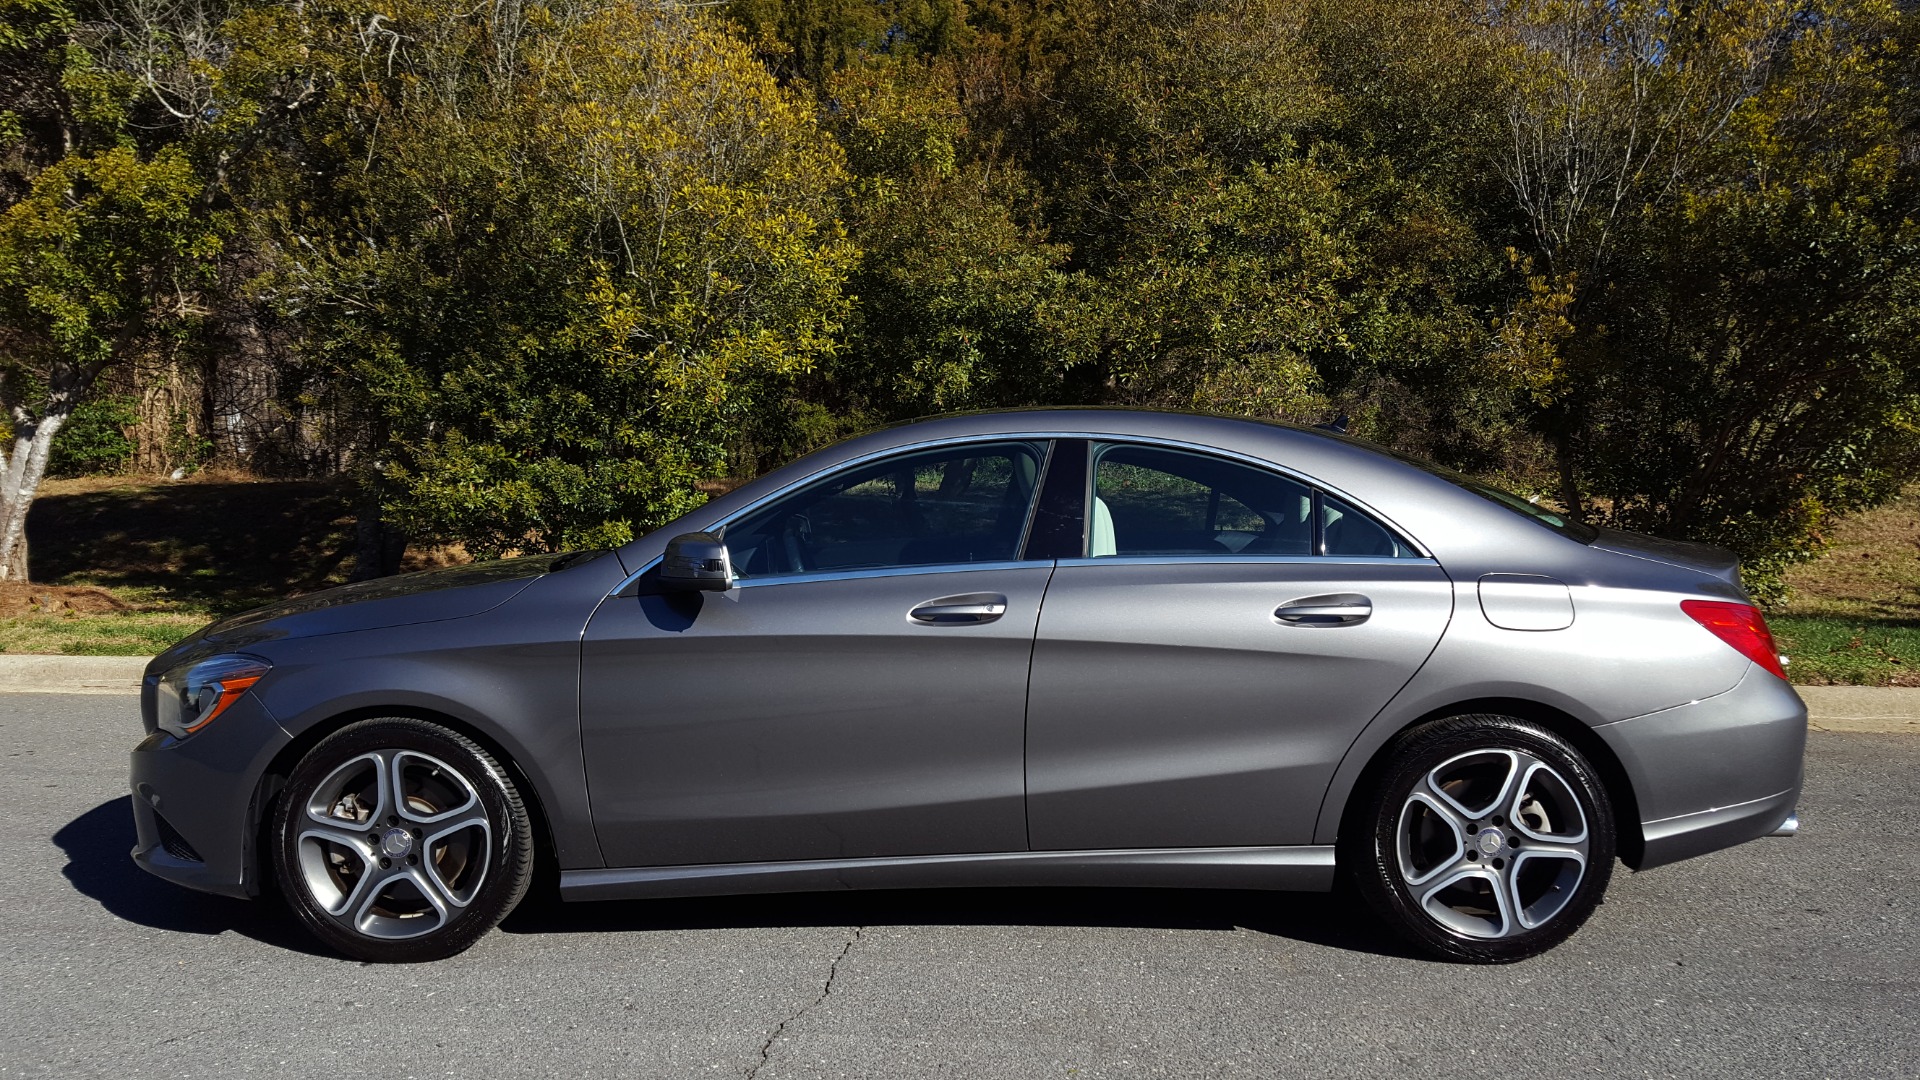 Used 2014 Mercedes-Benz CLA-CLASS CLA 250 / NAV / PANO-ROOF / BLIND SPOT ASSIST / XENON HEADLIGHTS for sale Sold at Formula Imports in Charlotte NC 28227 2